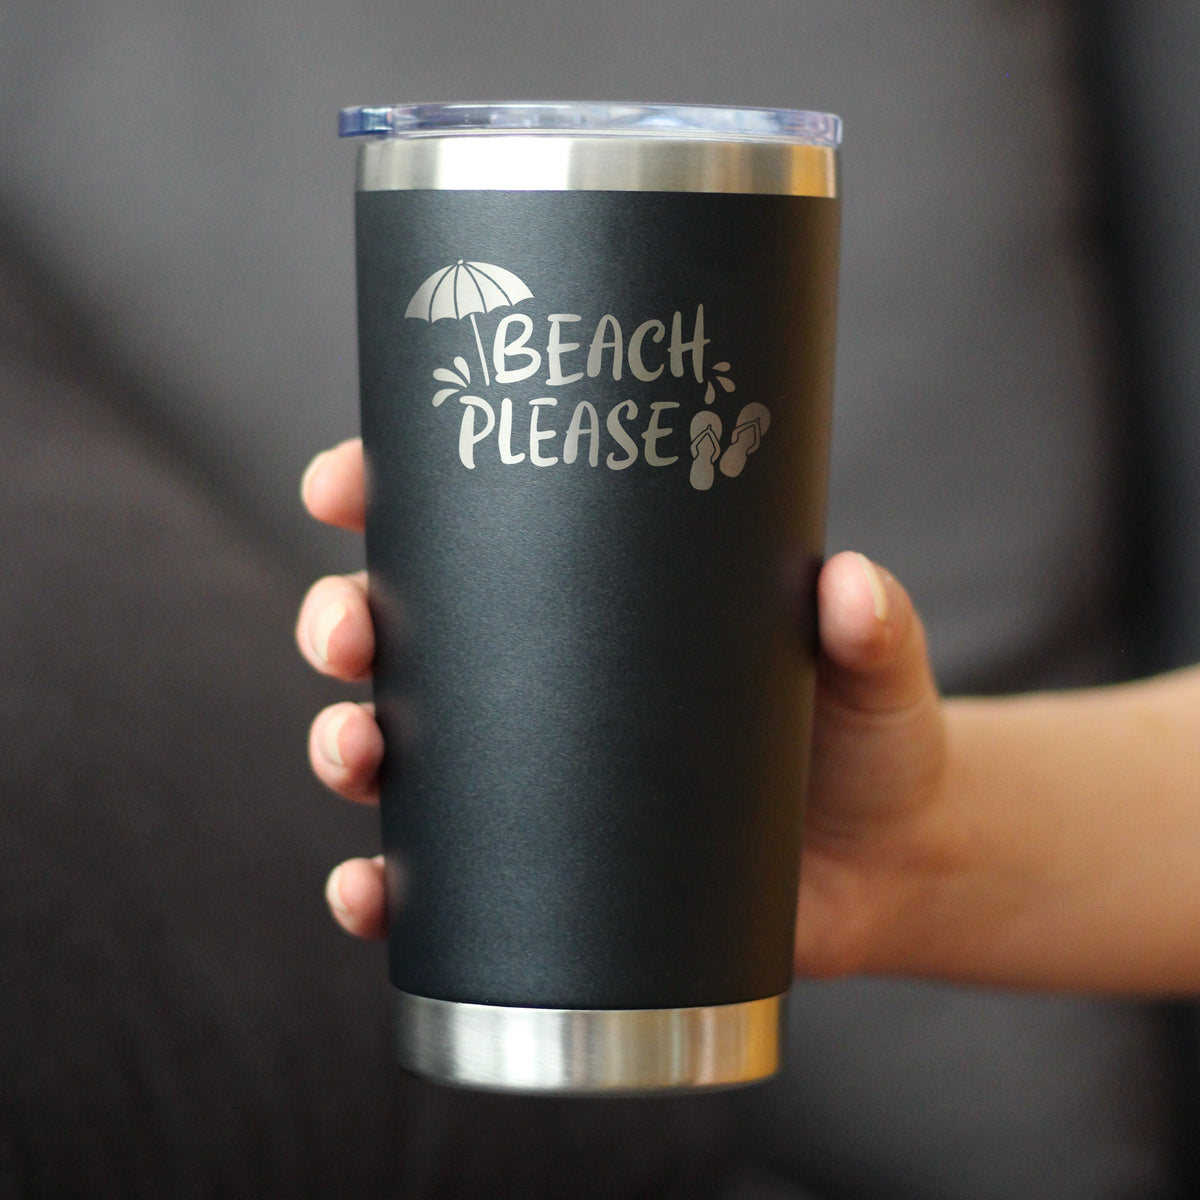 Beach Please - Insulated Coffee Tumbler Cup with Sliding Lid - Stainless Steel Travel Mug - Fun Beach Themed Gifts